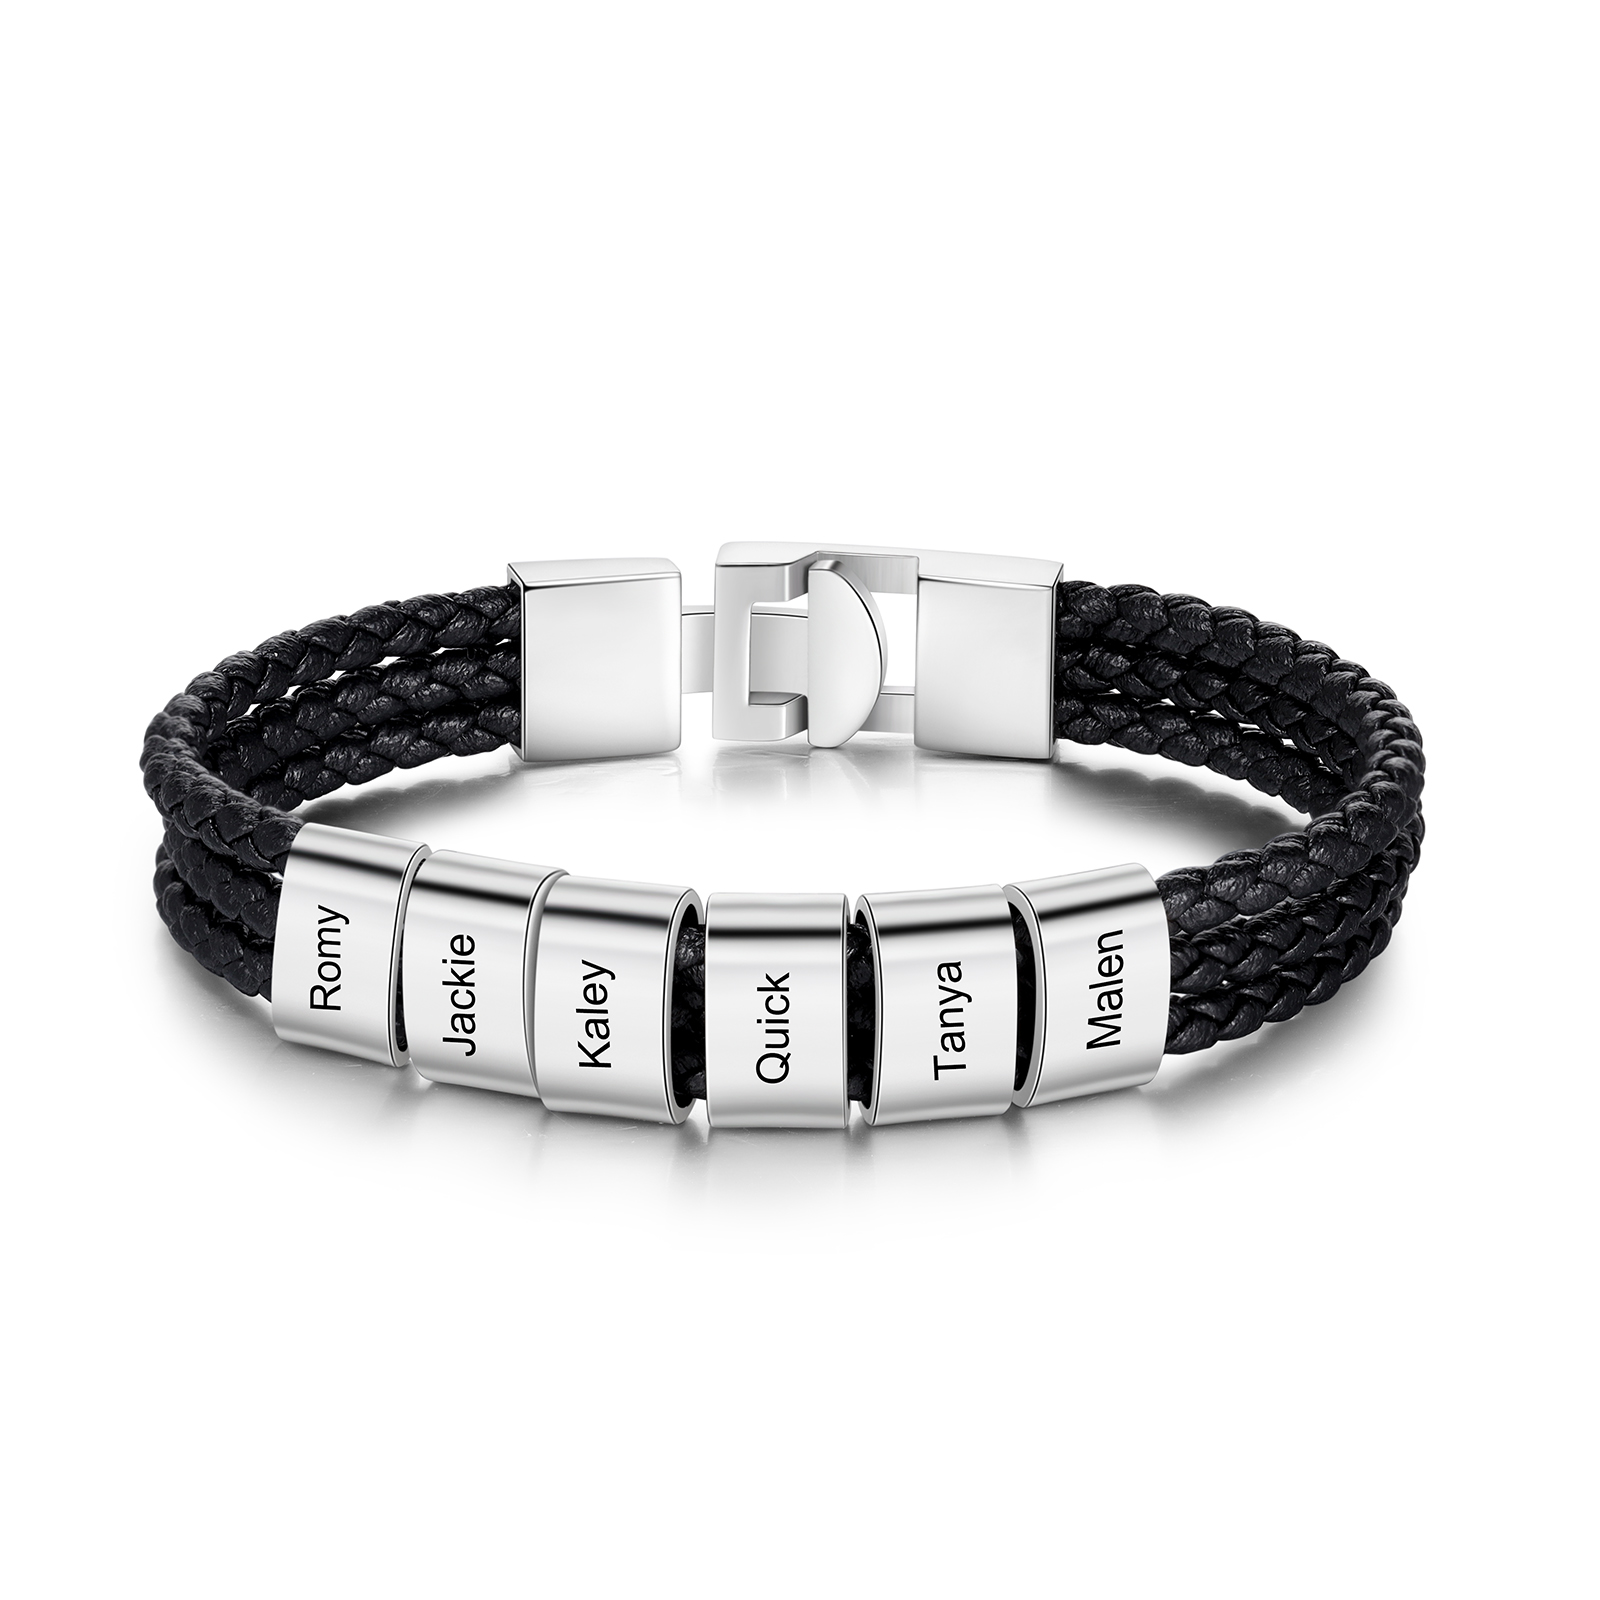 Personalized Braided Leather Bracelet Engraved 6 Names Men's Bracelet Gifts For Him